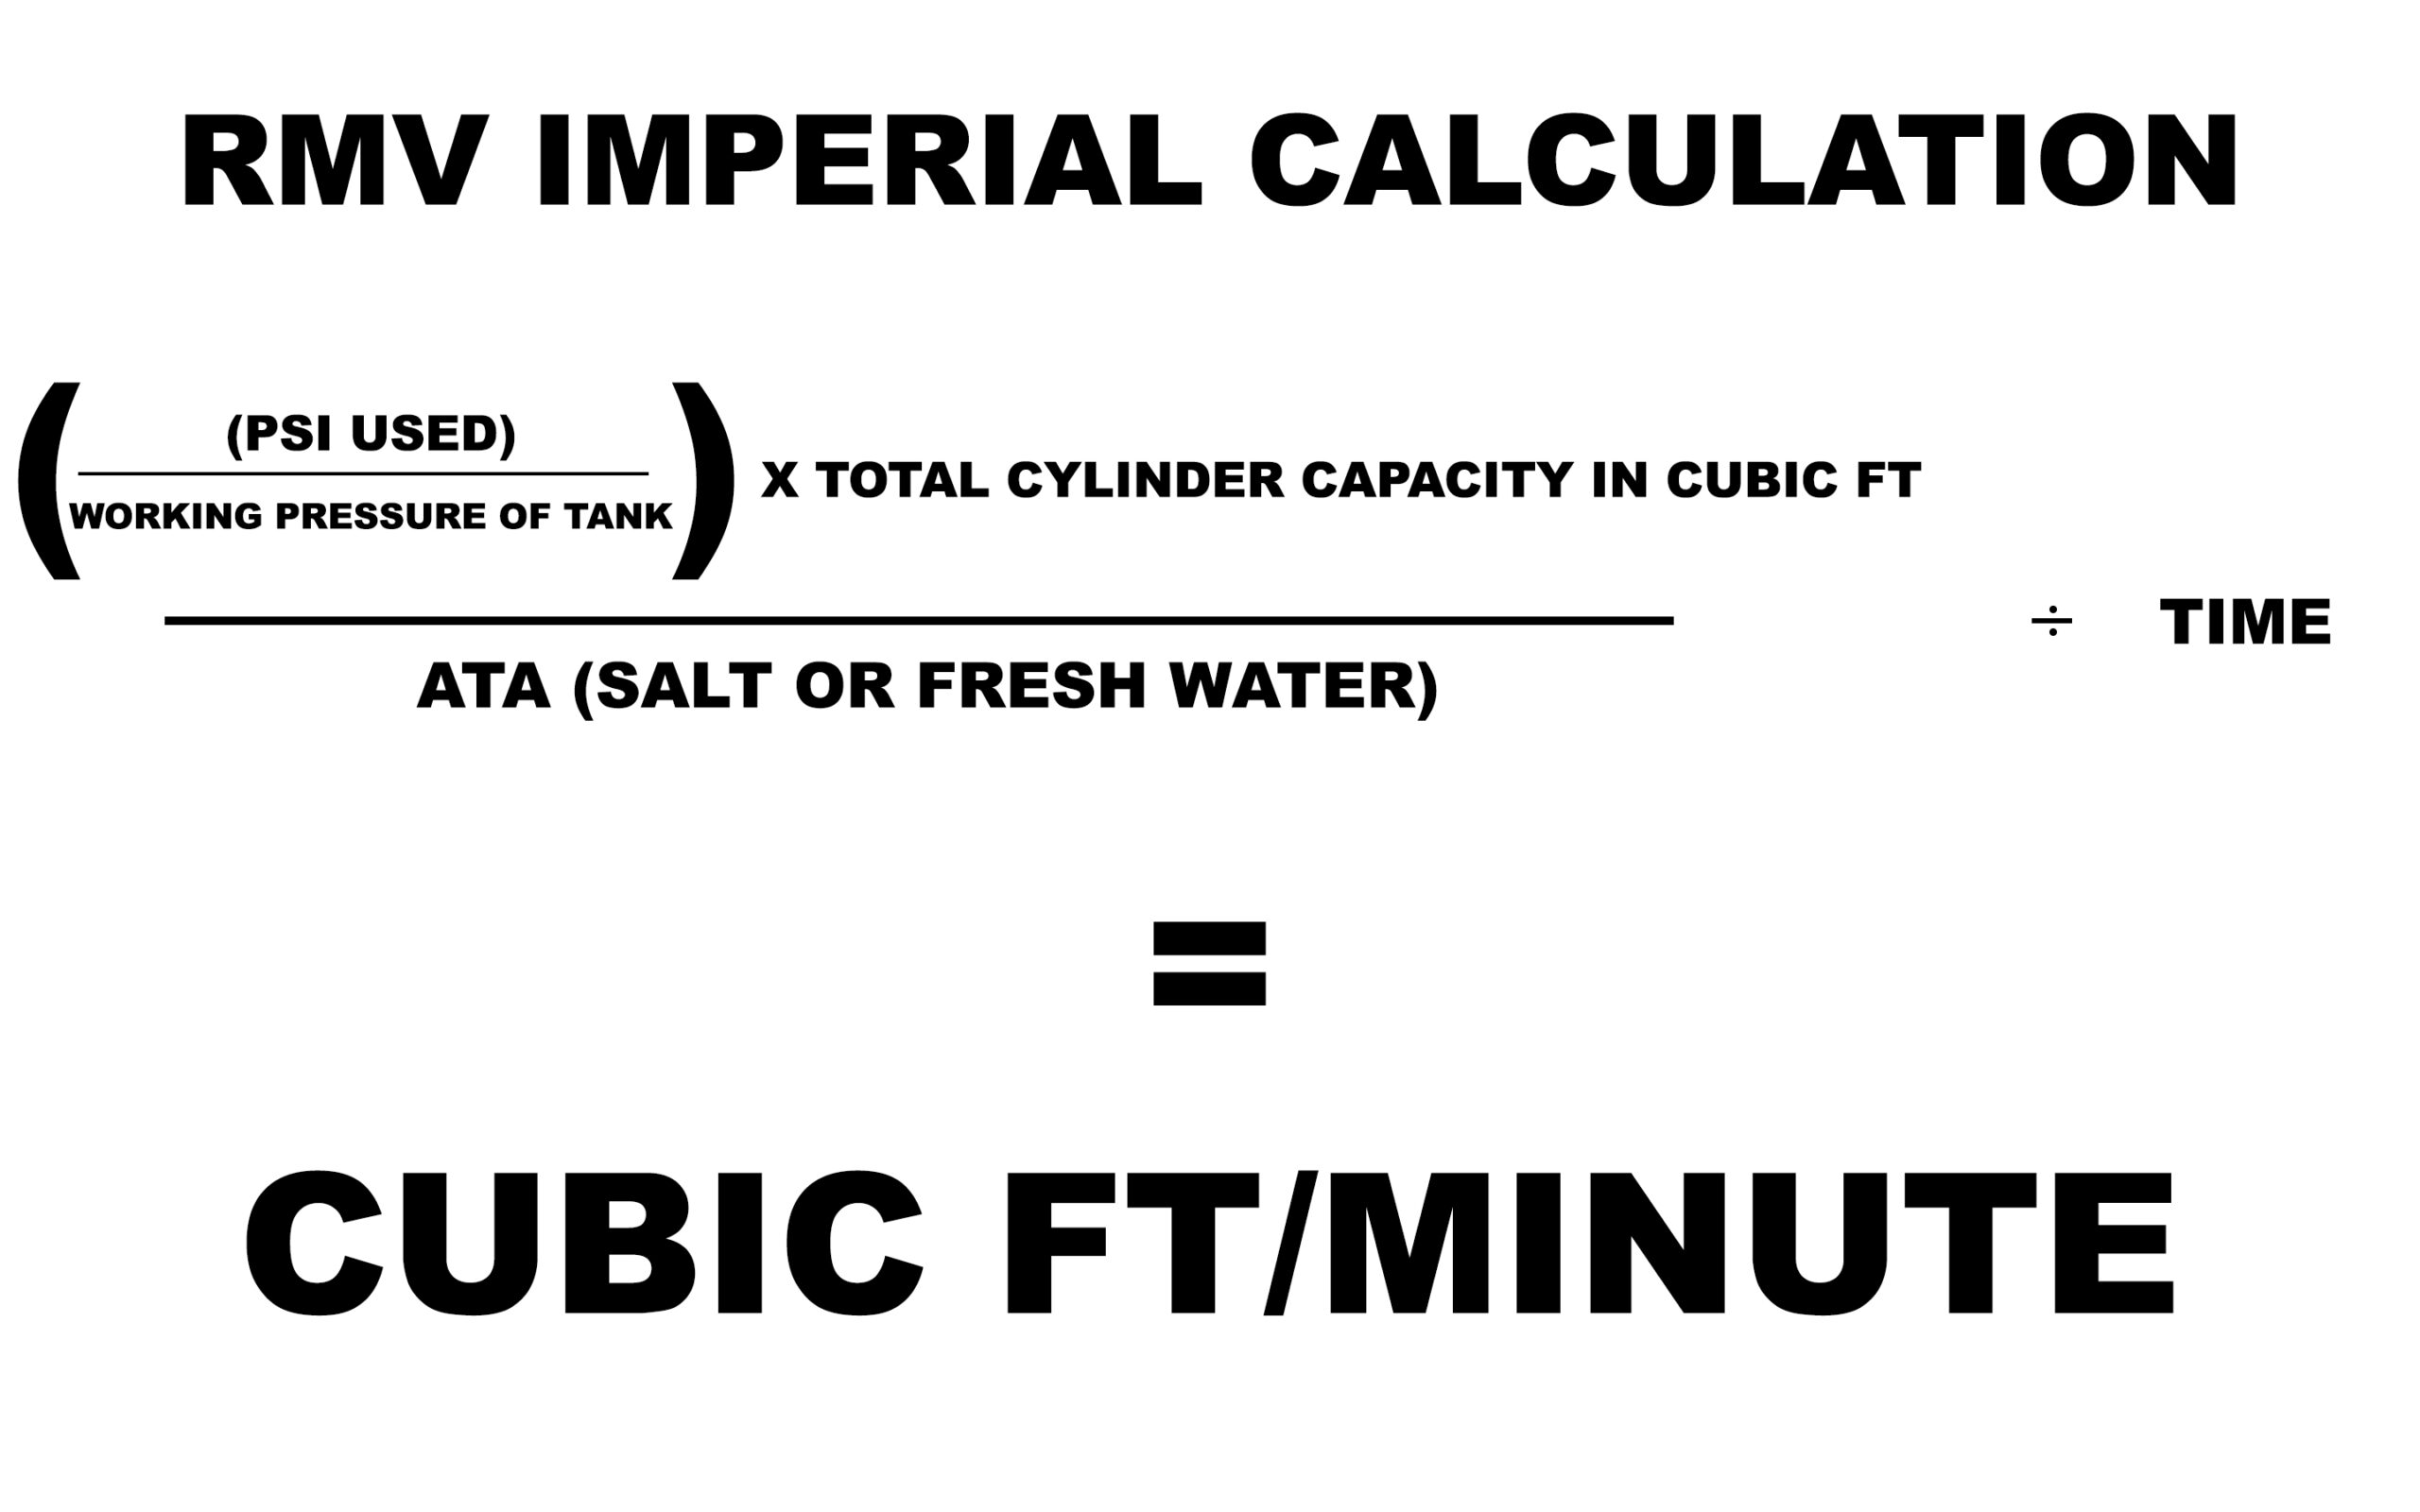 RMV calculation in imperial